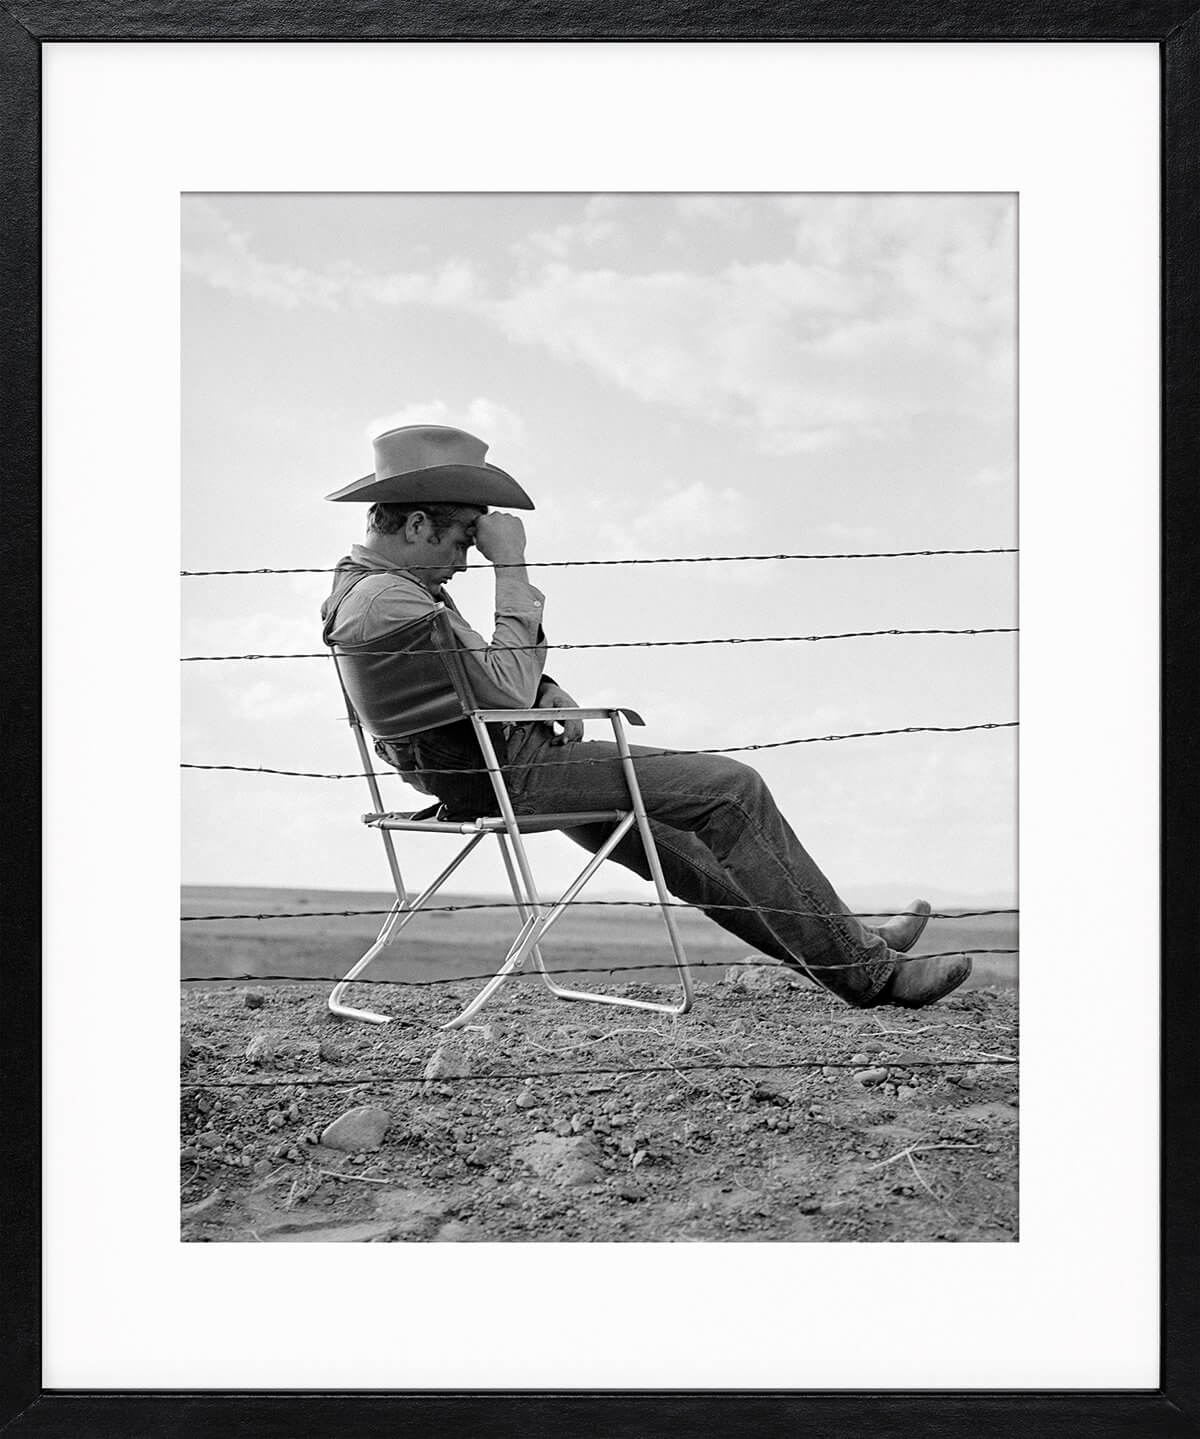 Frank Worth: James Dean seated behind Fence Set of Giant 1955